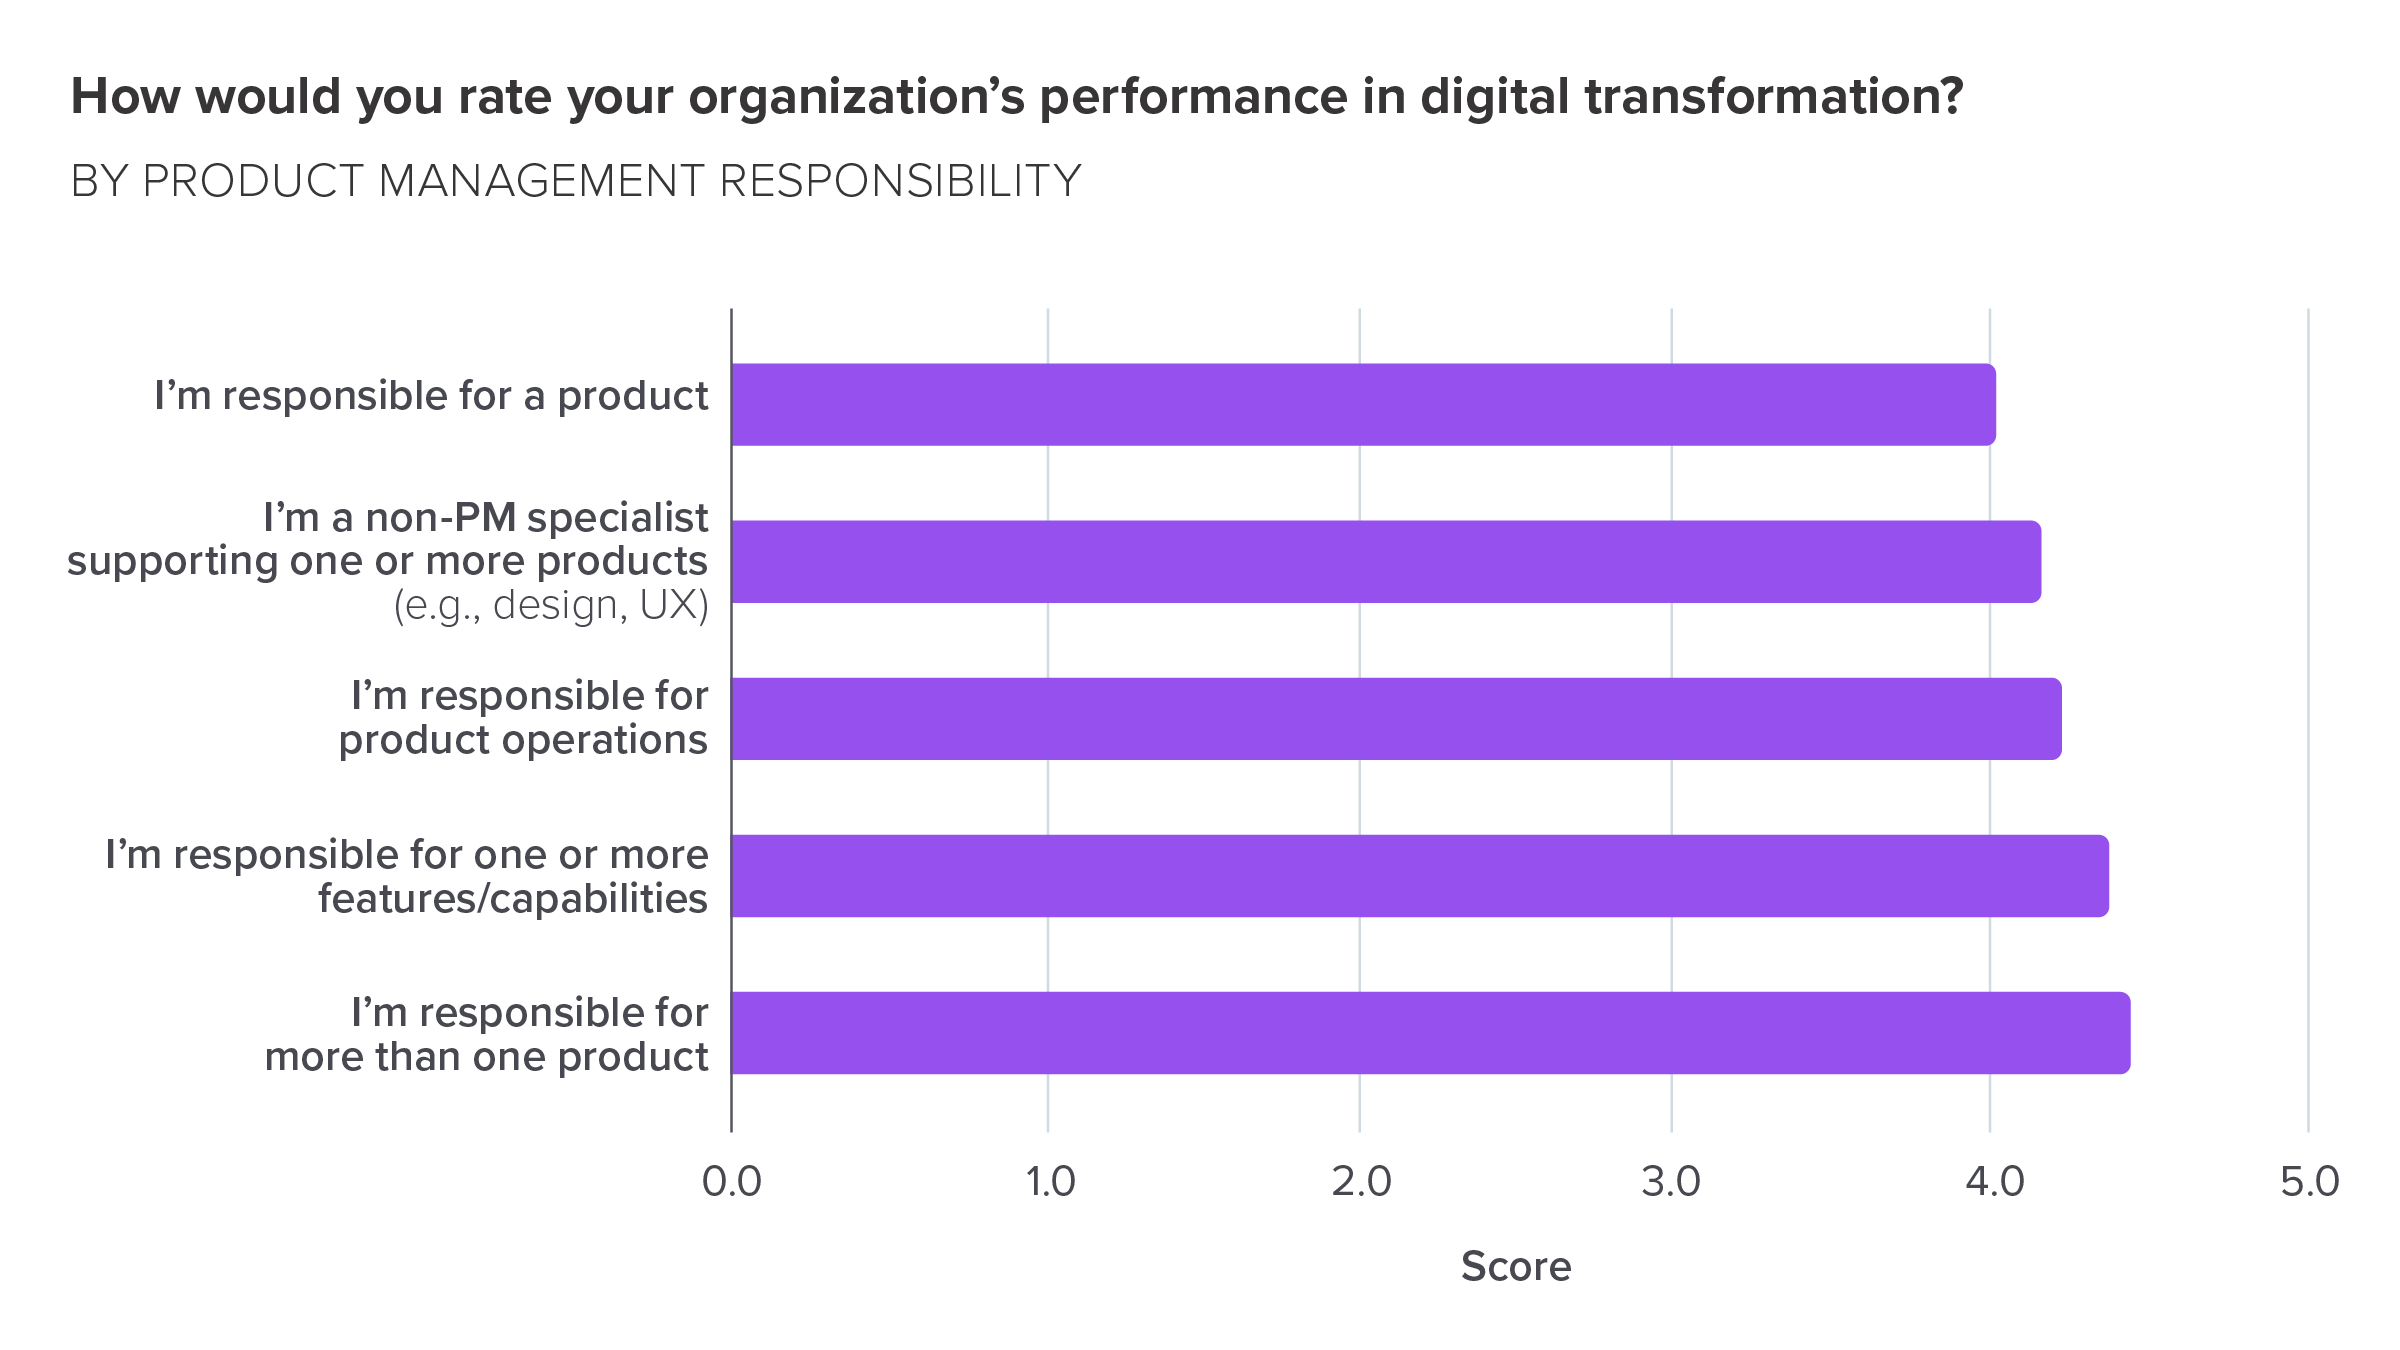 How would you rate your organization’s performance in digital transformation? By product management responsibility